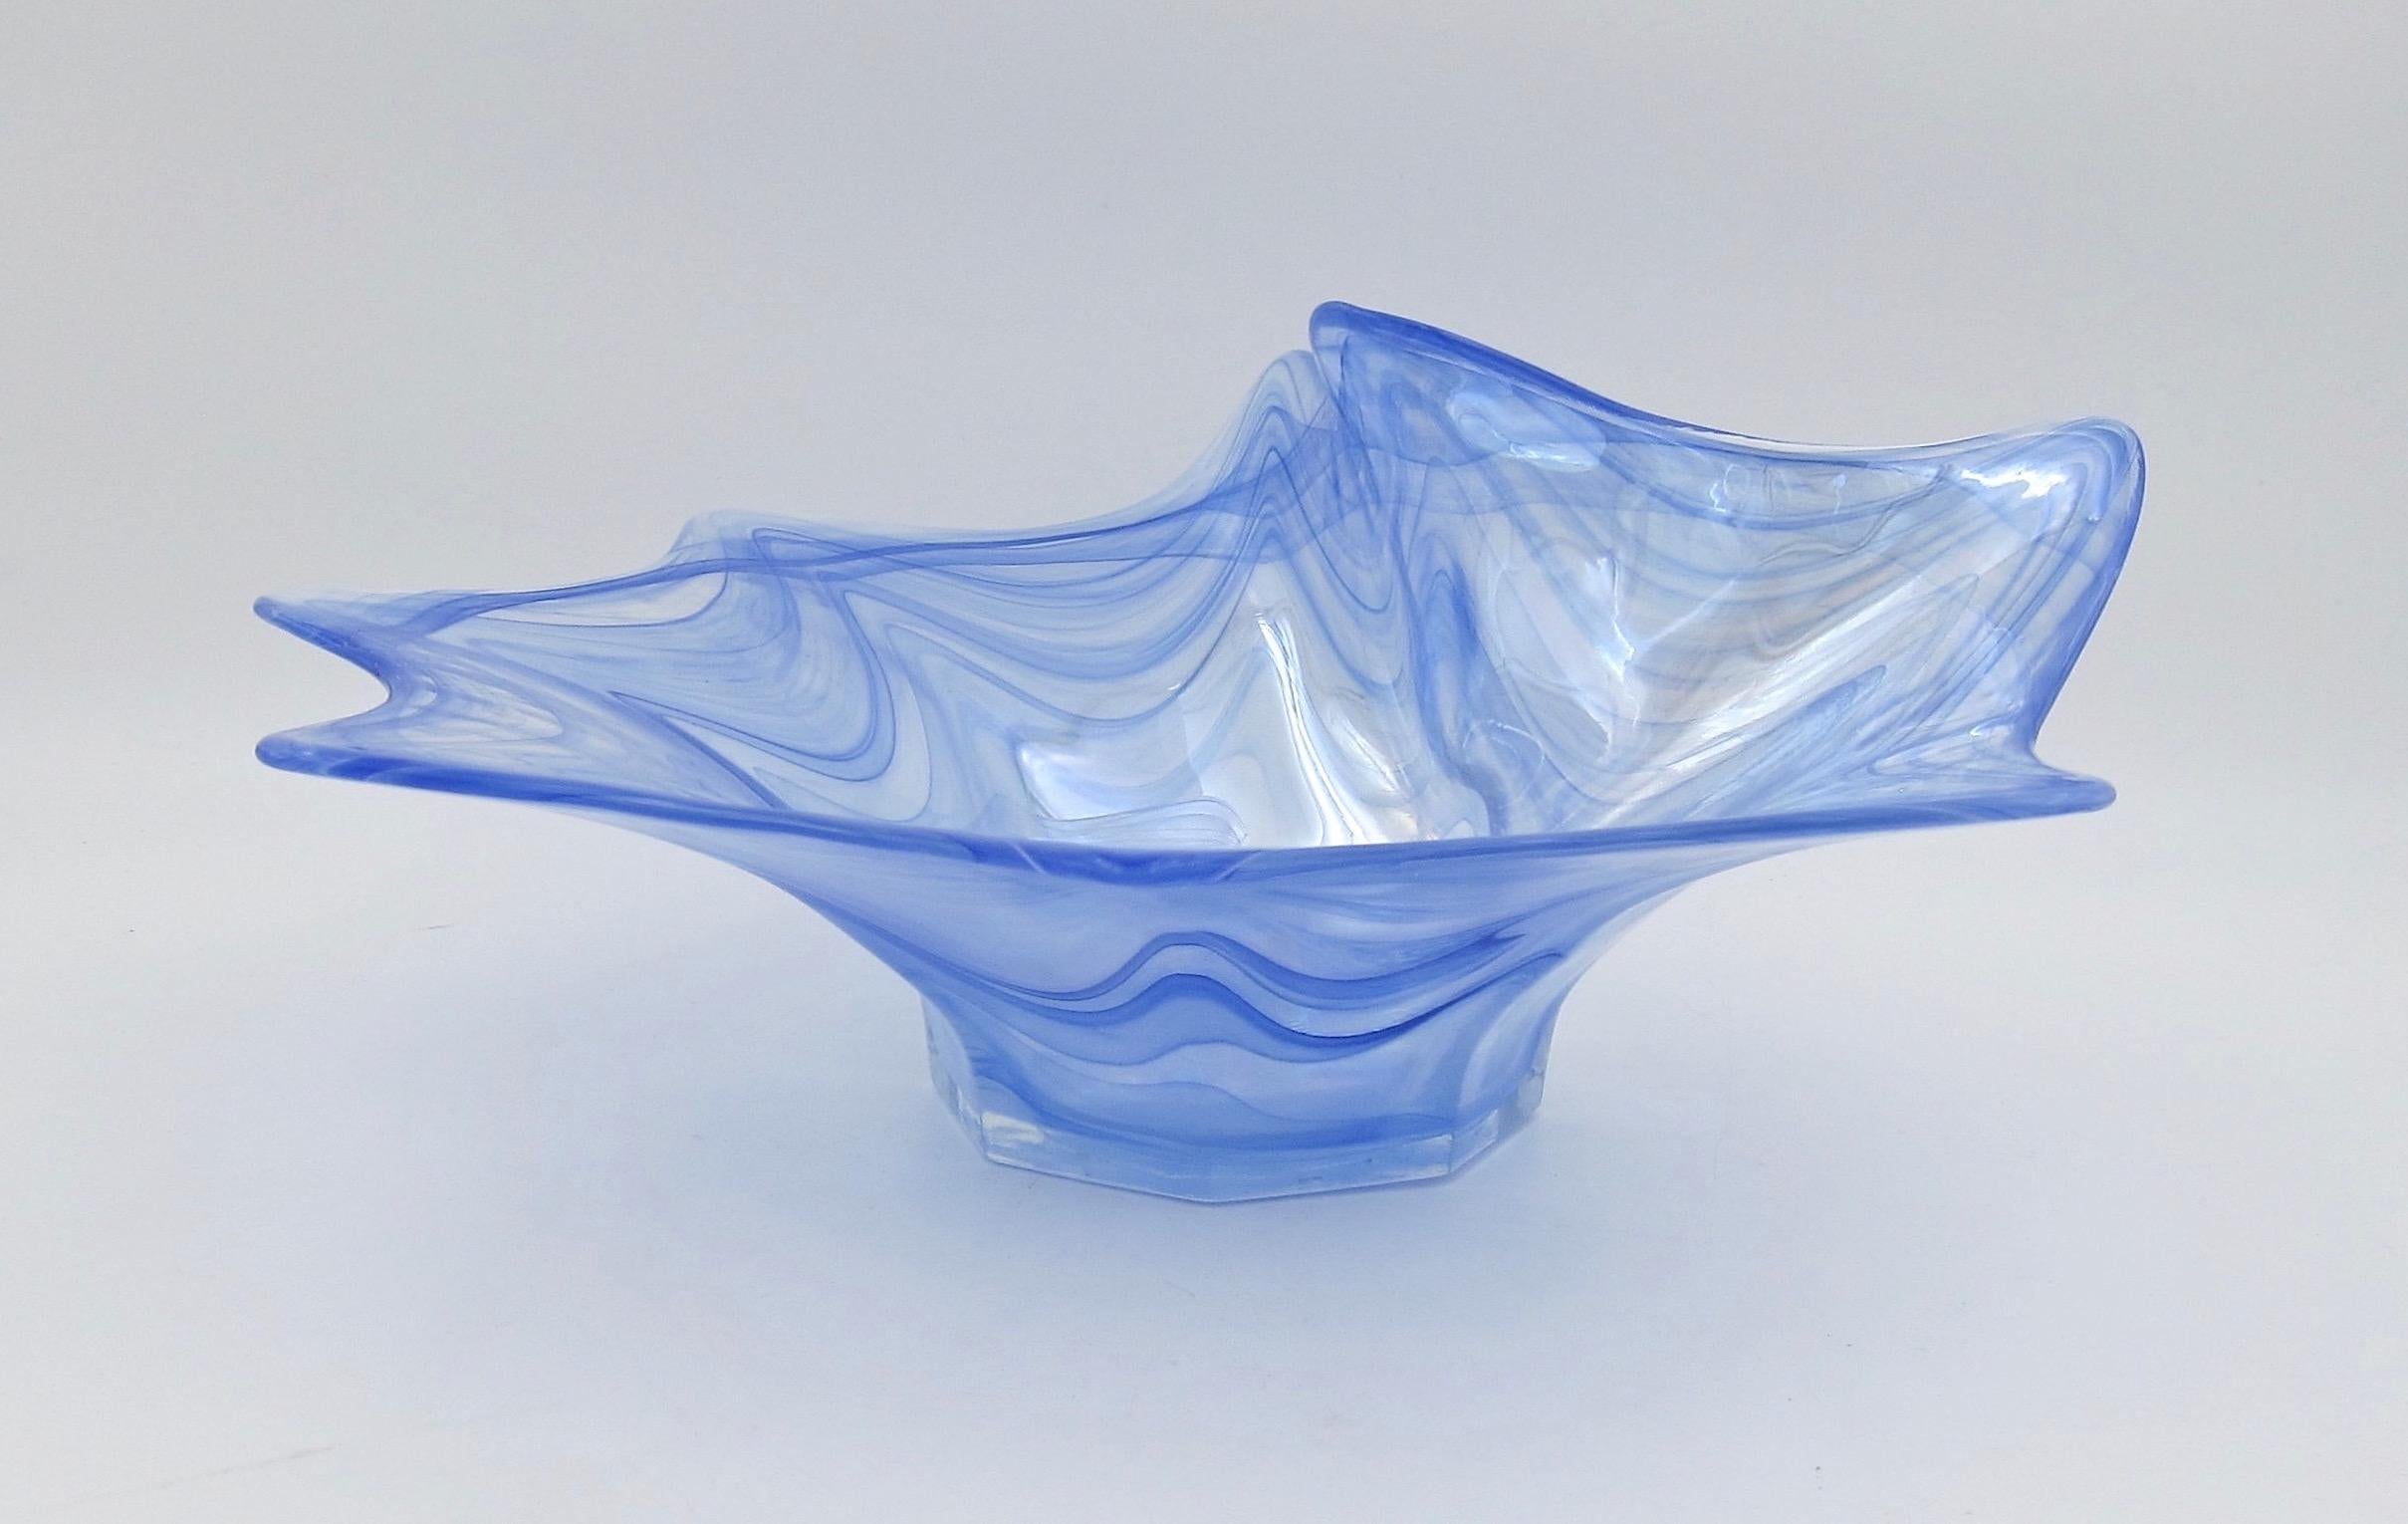 An Italian art glass bowl flaring up and outward from a molded hexagonal foot. The sculptural bowl of clear glass has pulled blue threads throughout with golden iridescent highlights. The profile and color of the bowl resemble a splashing drop of